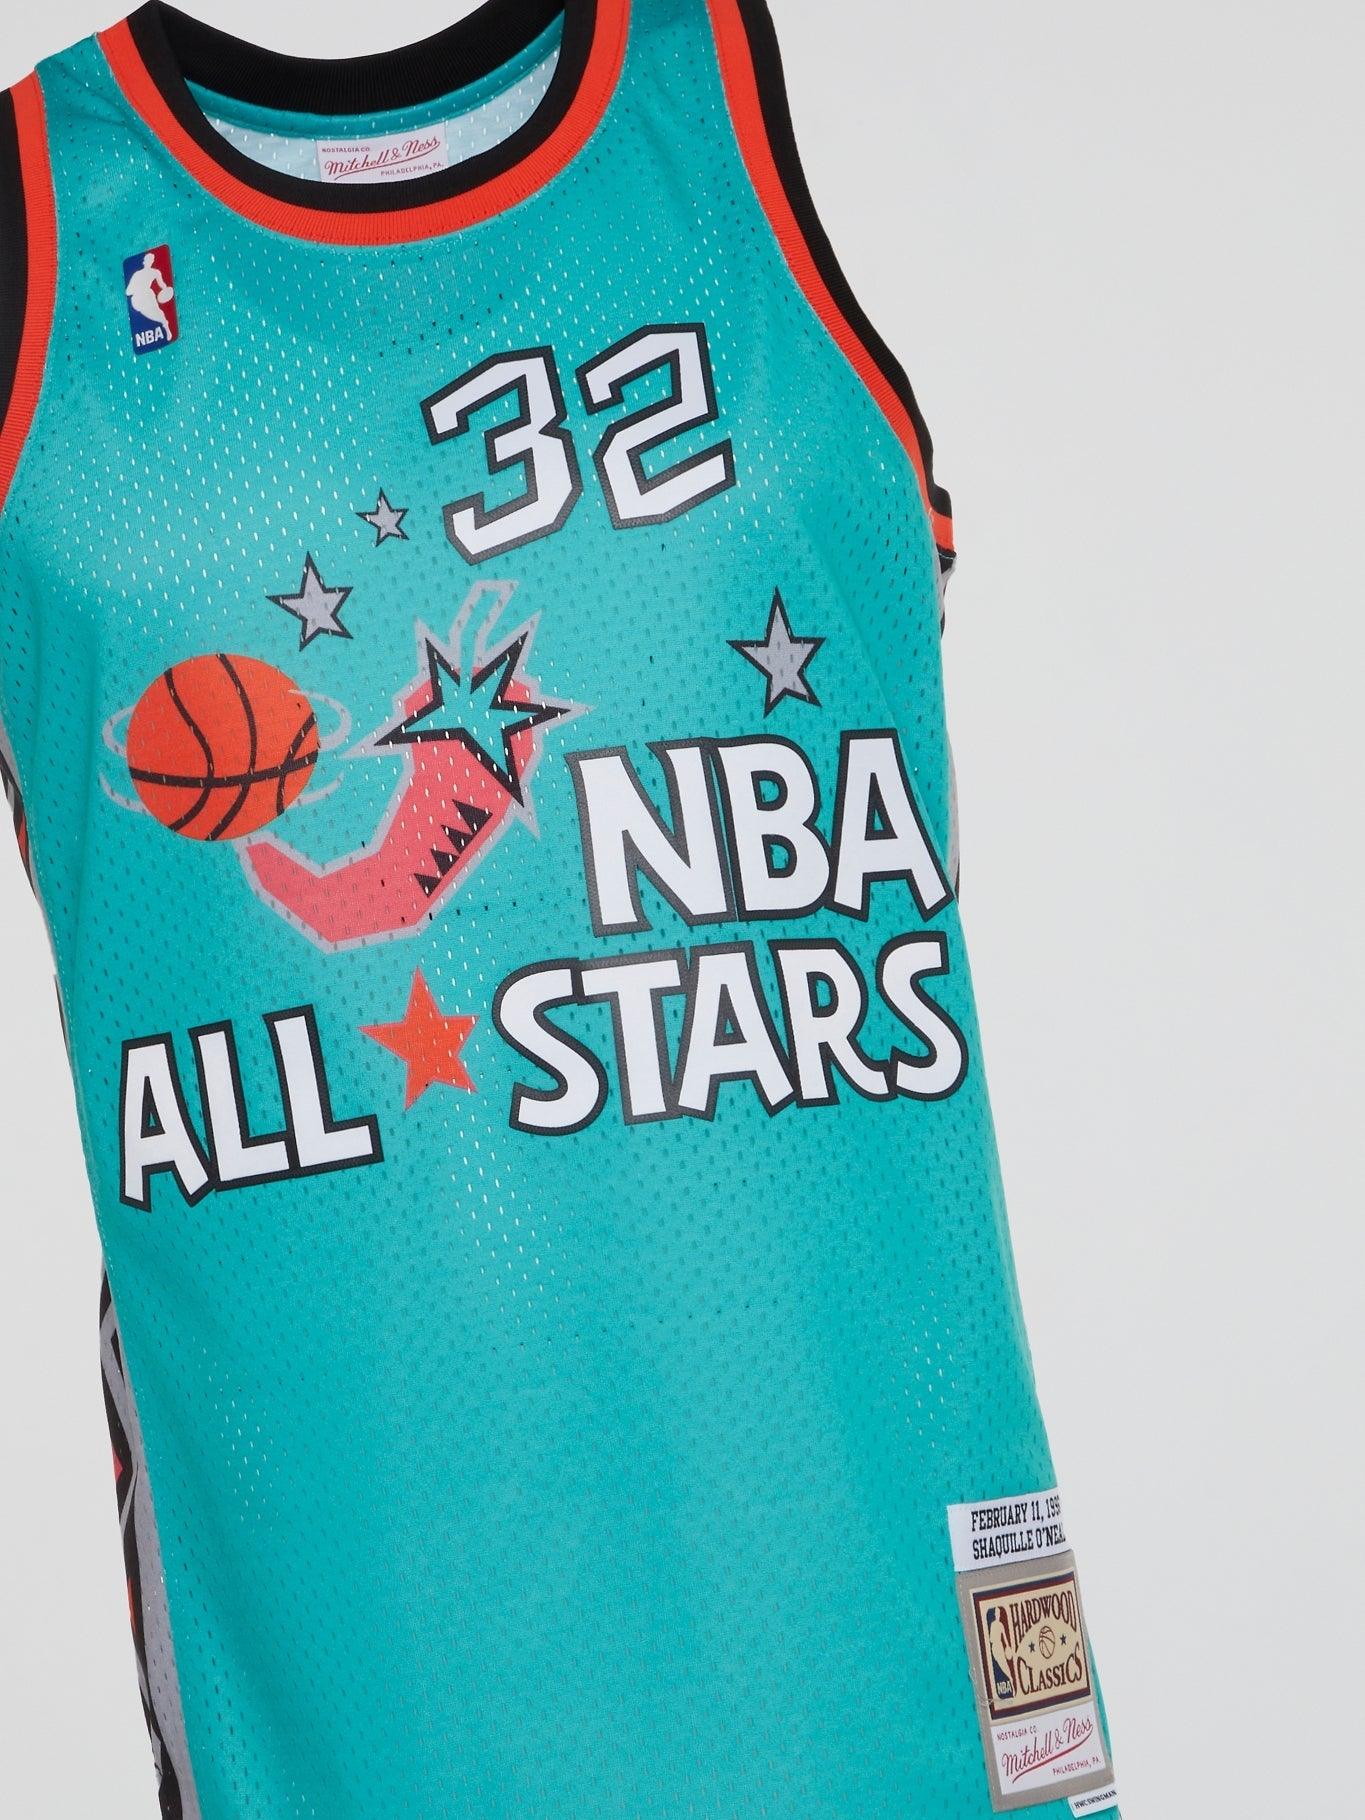 NBA Swingman Jersey All Star 96 Shaquille O\'Neal - Teal - B-Hype Society